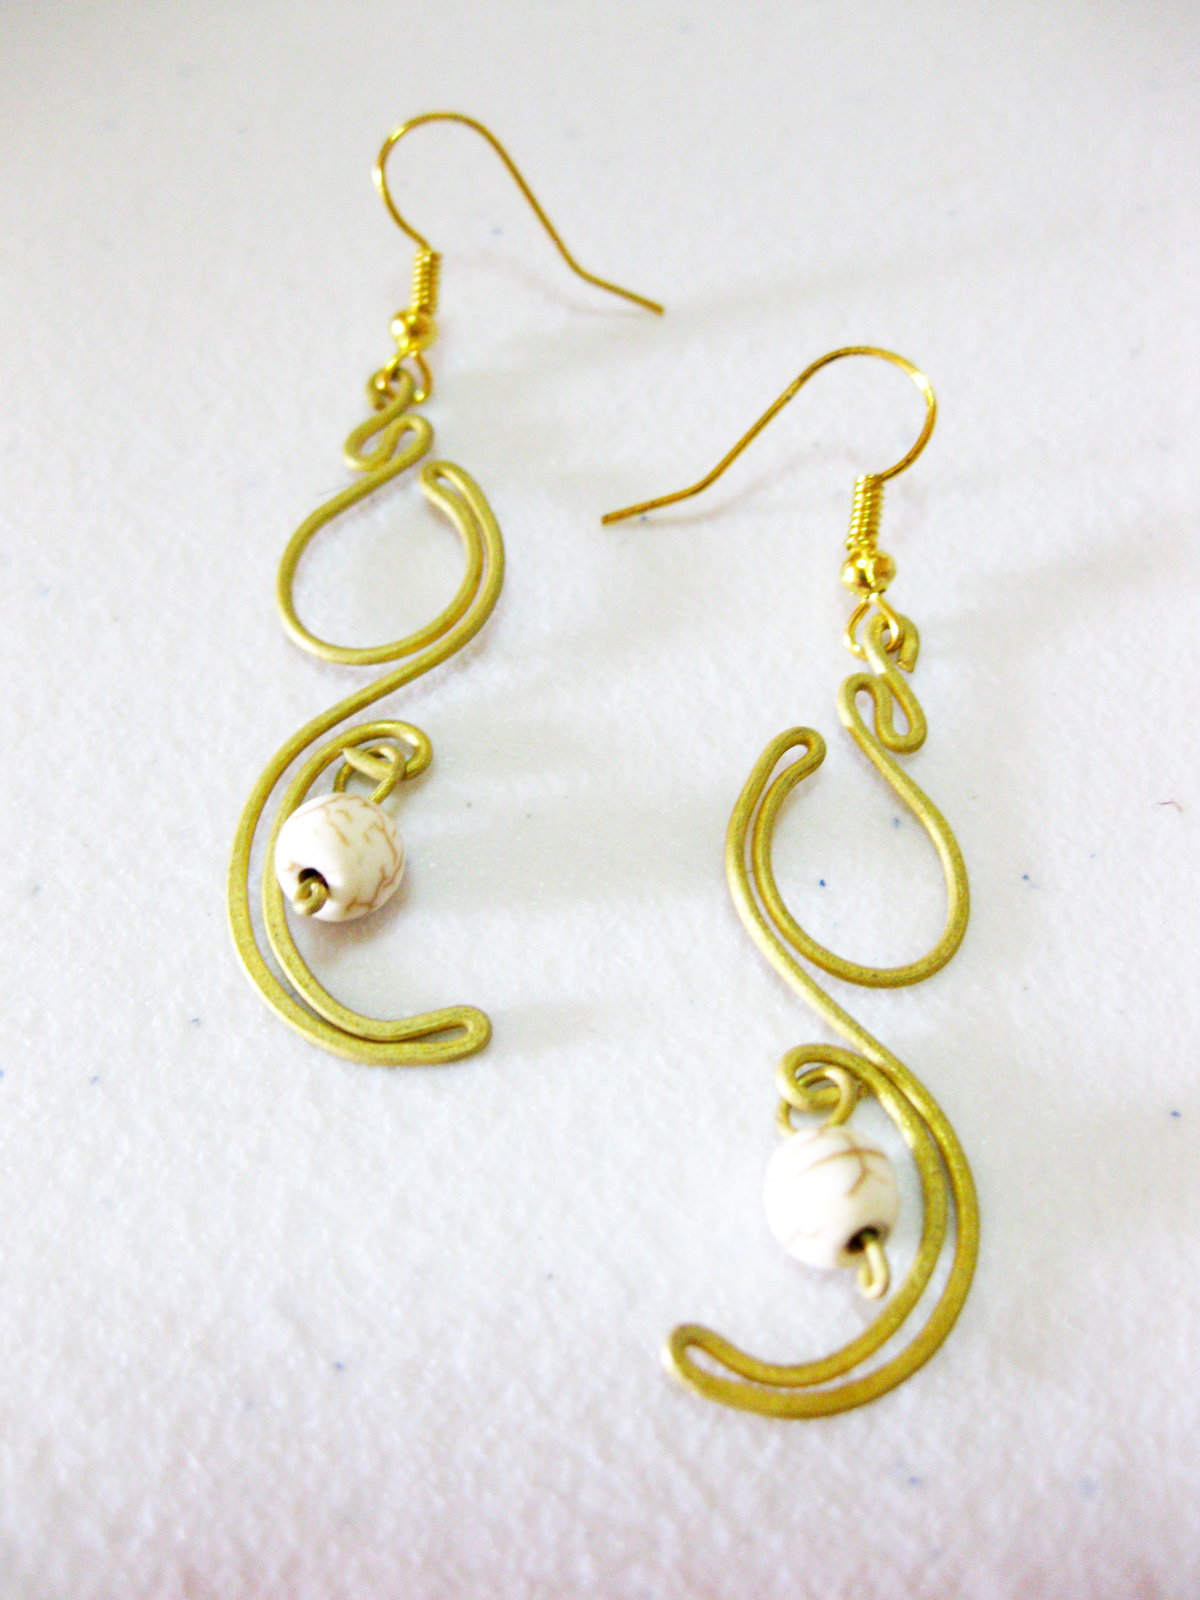 Swirl Brass Earrings, Brass Dangle Earrings With White Stones Beads, Fashion Designs, Thailand Handmade Jewelry. (je1017-wh)